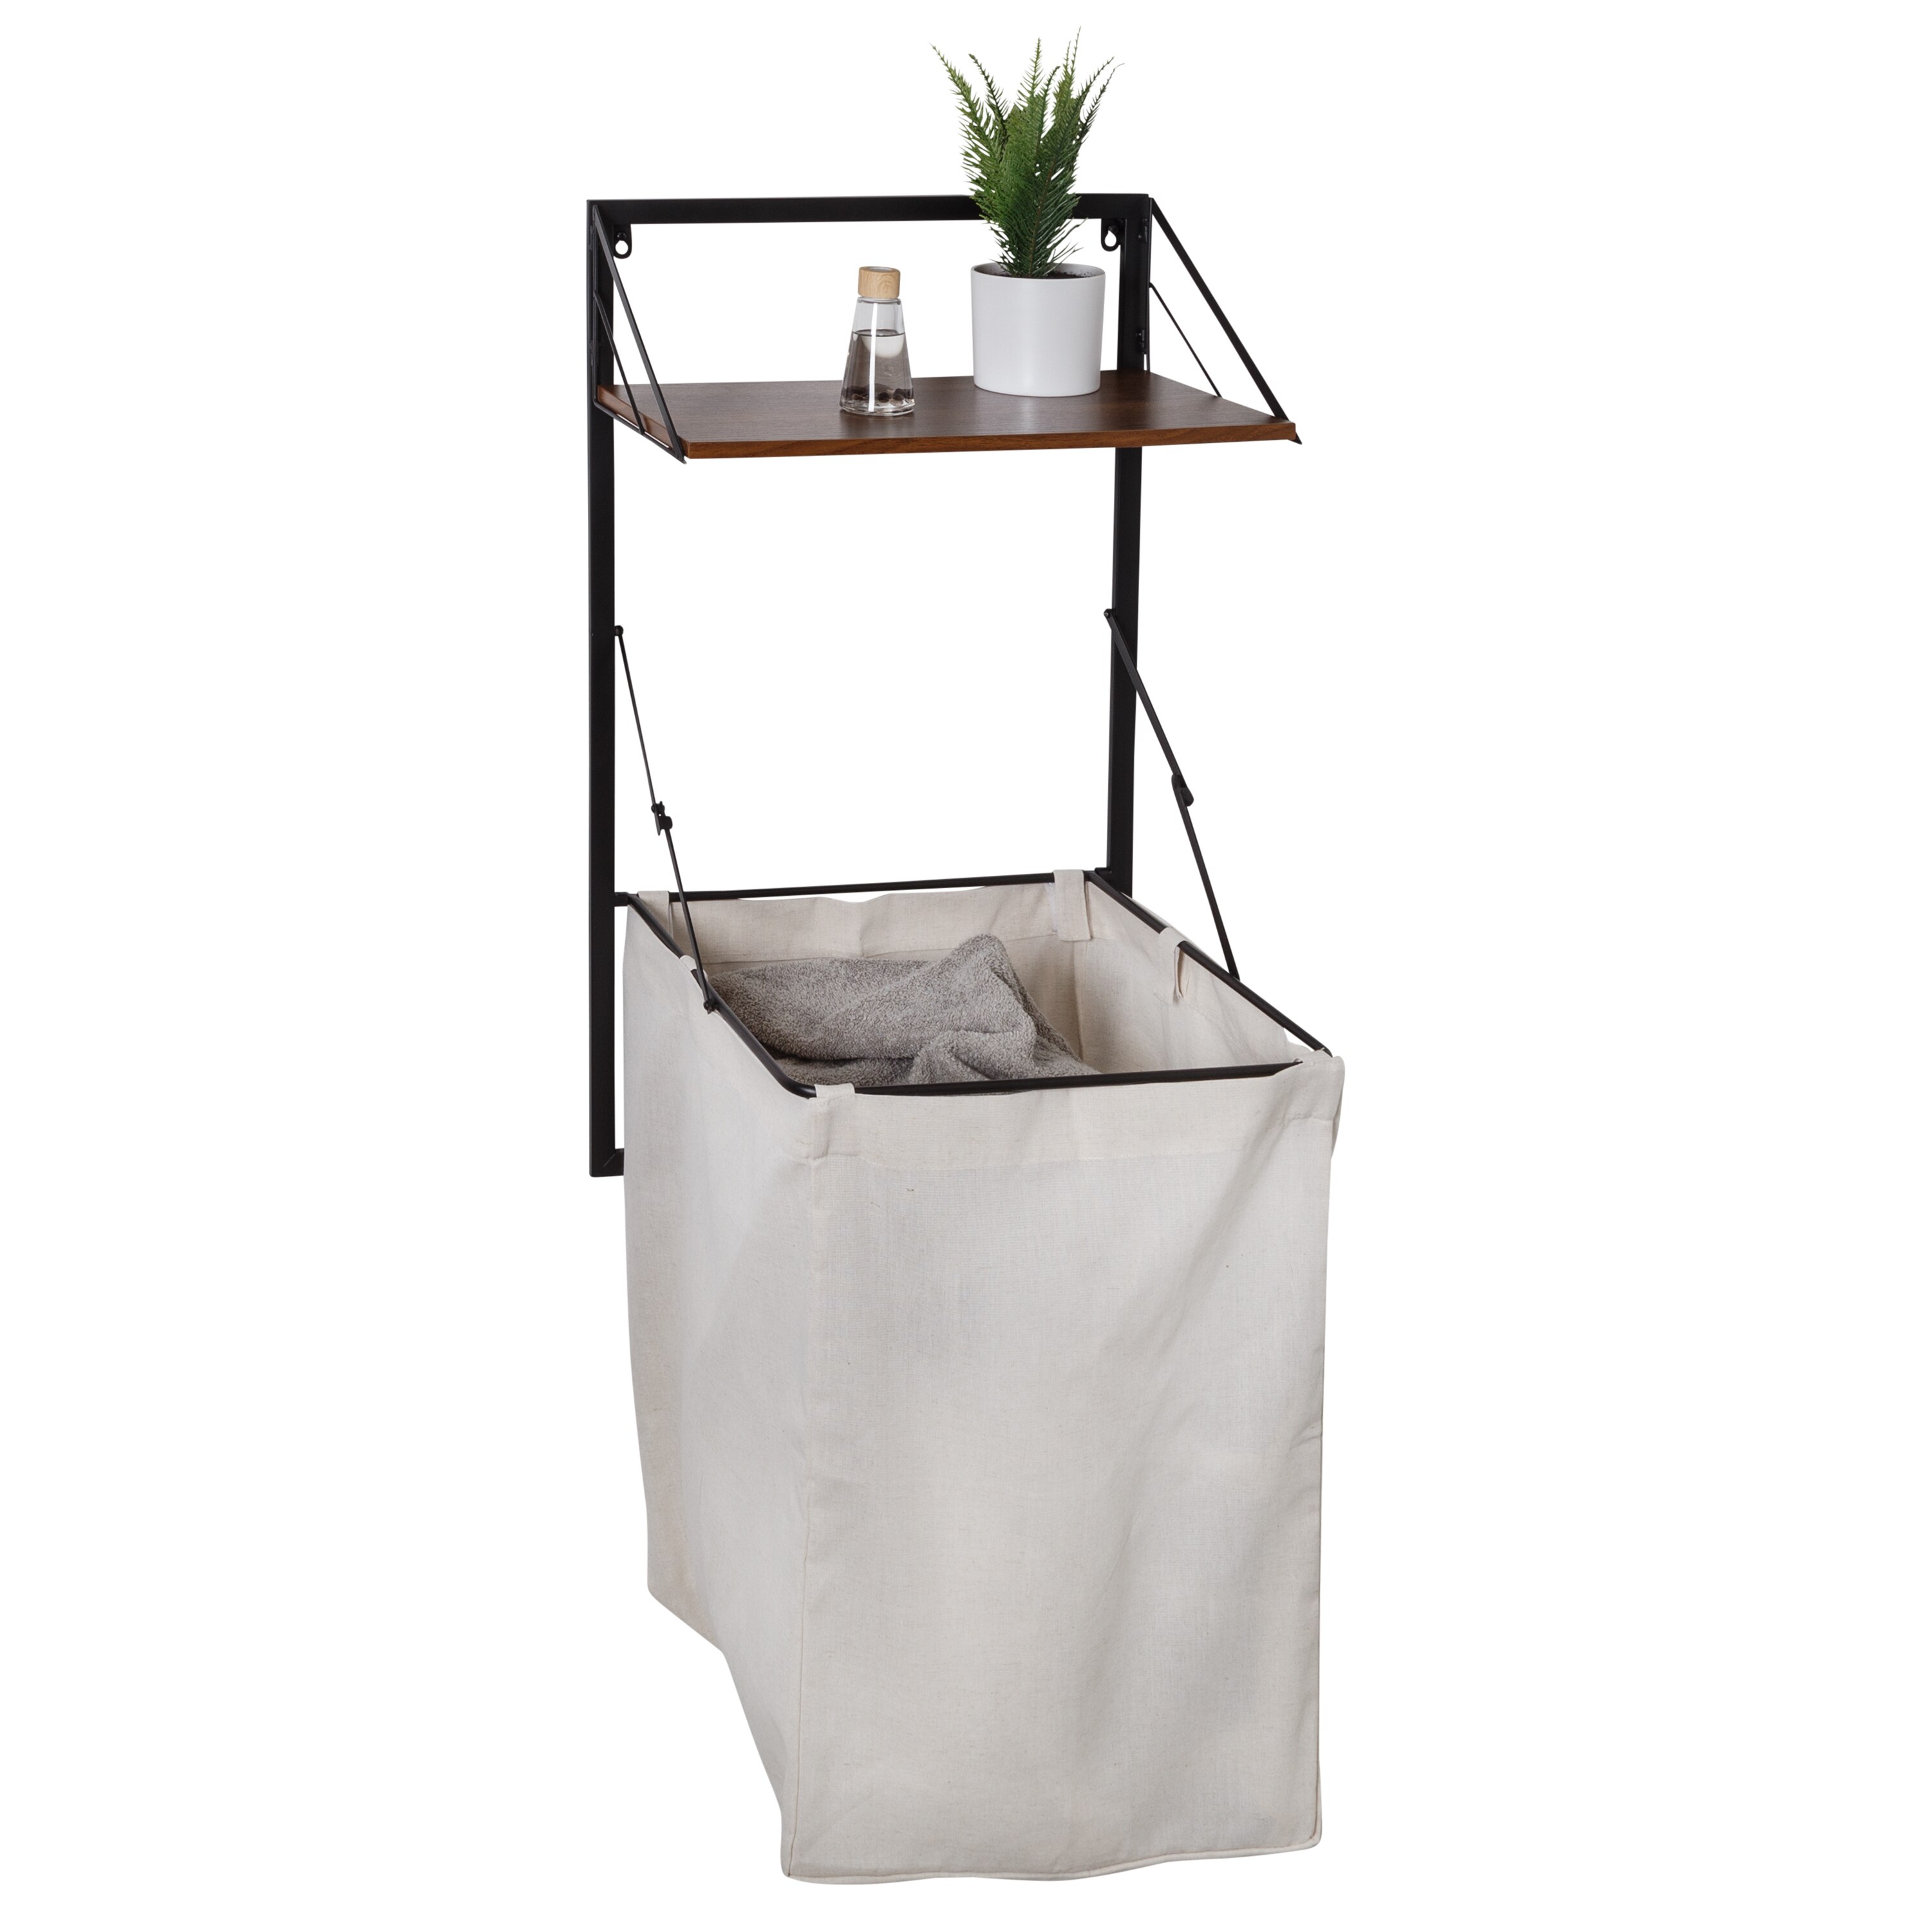 Collapsible Wall-Mounted Clothes Hamper with Canvas Laundry Bag and Wood Shelf